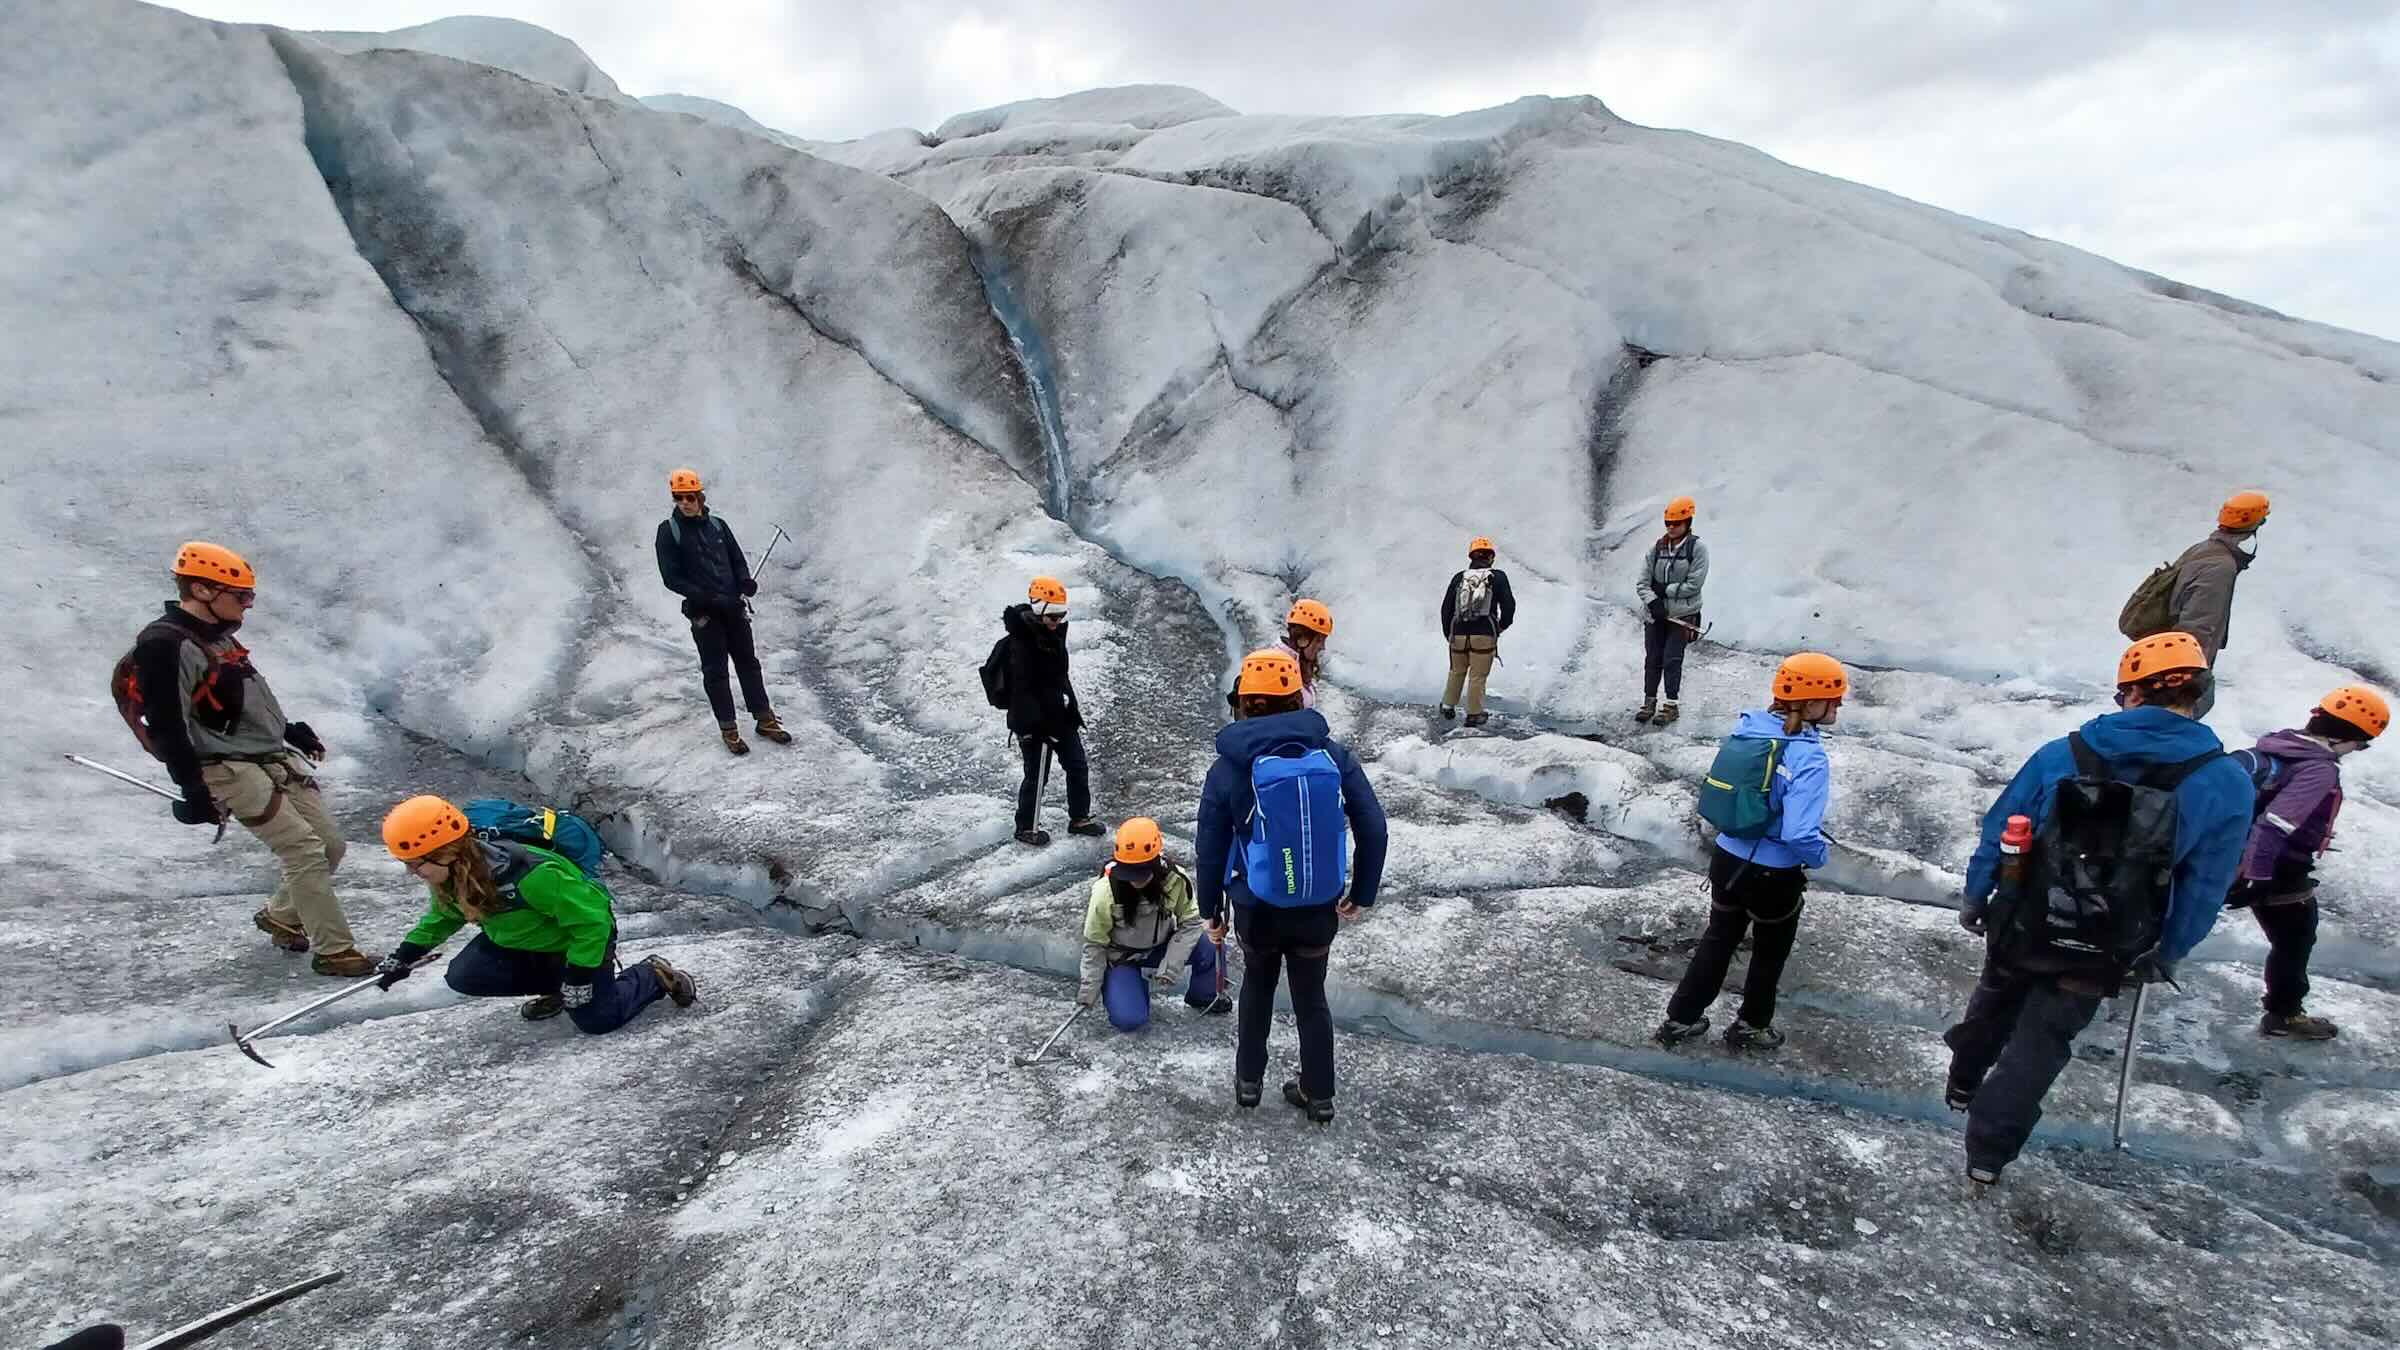 Group of people walking on a glacier.